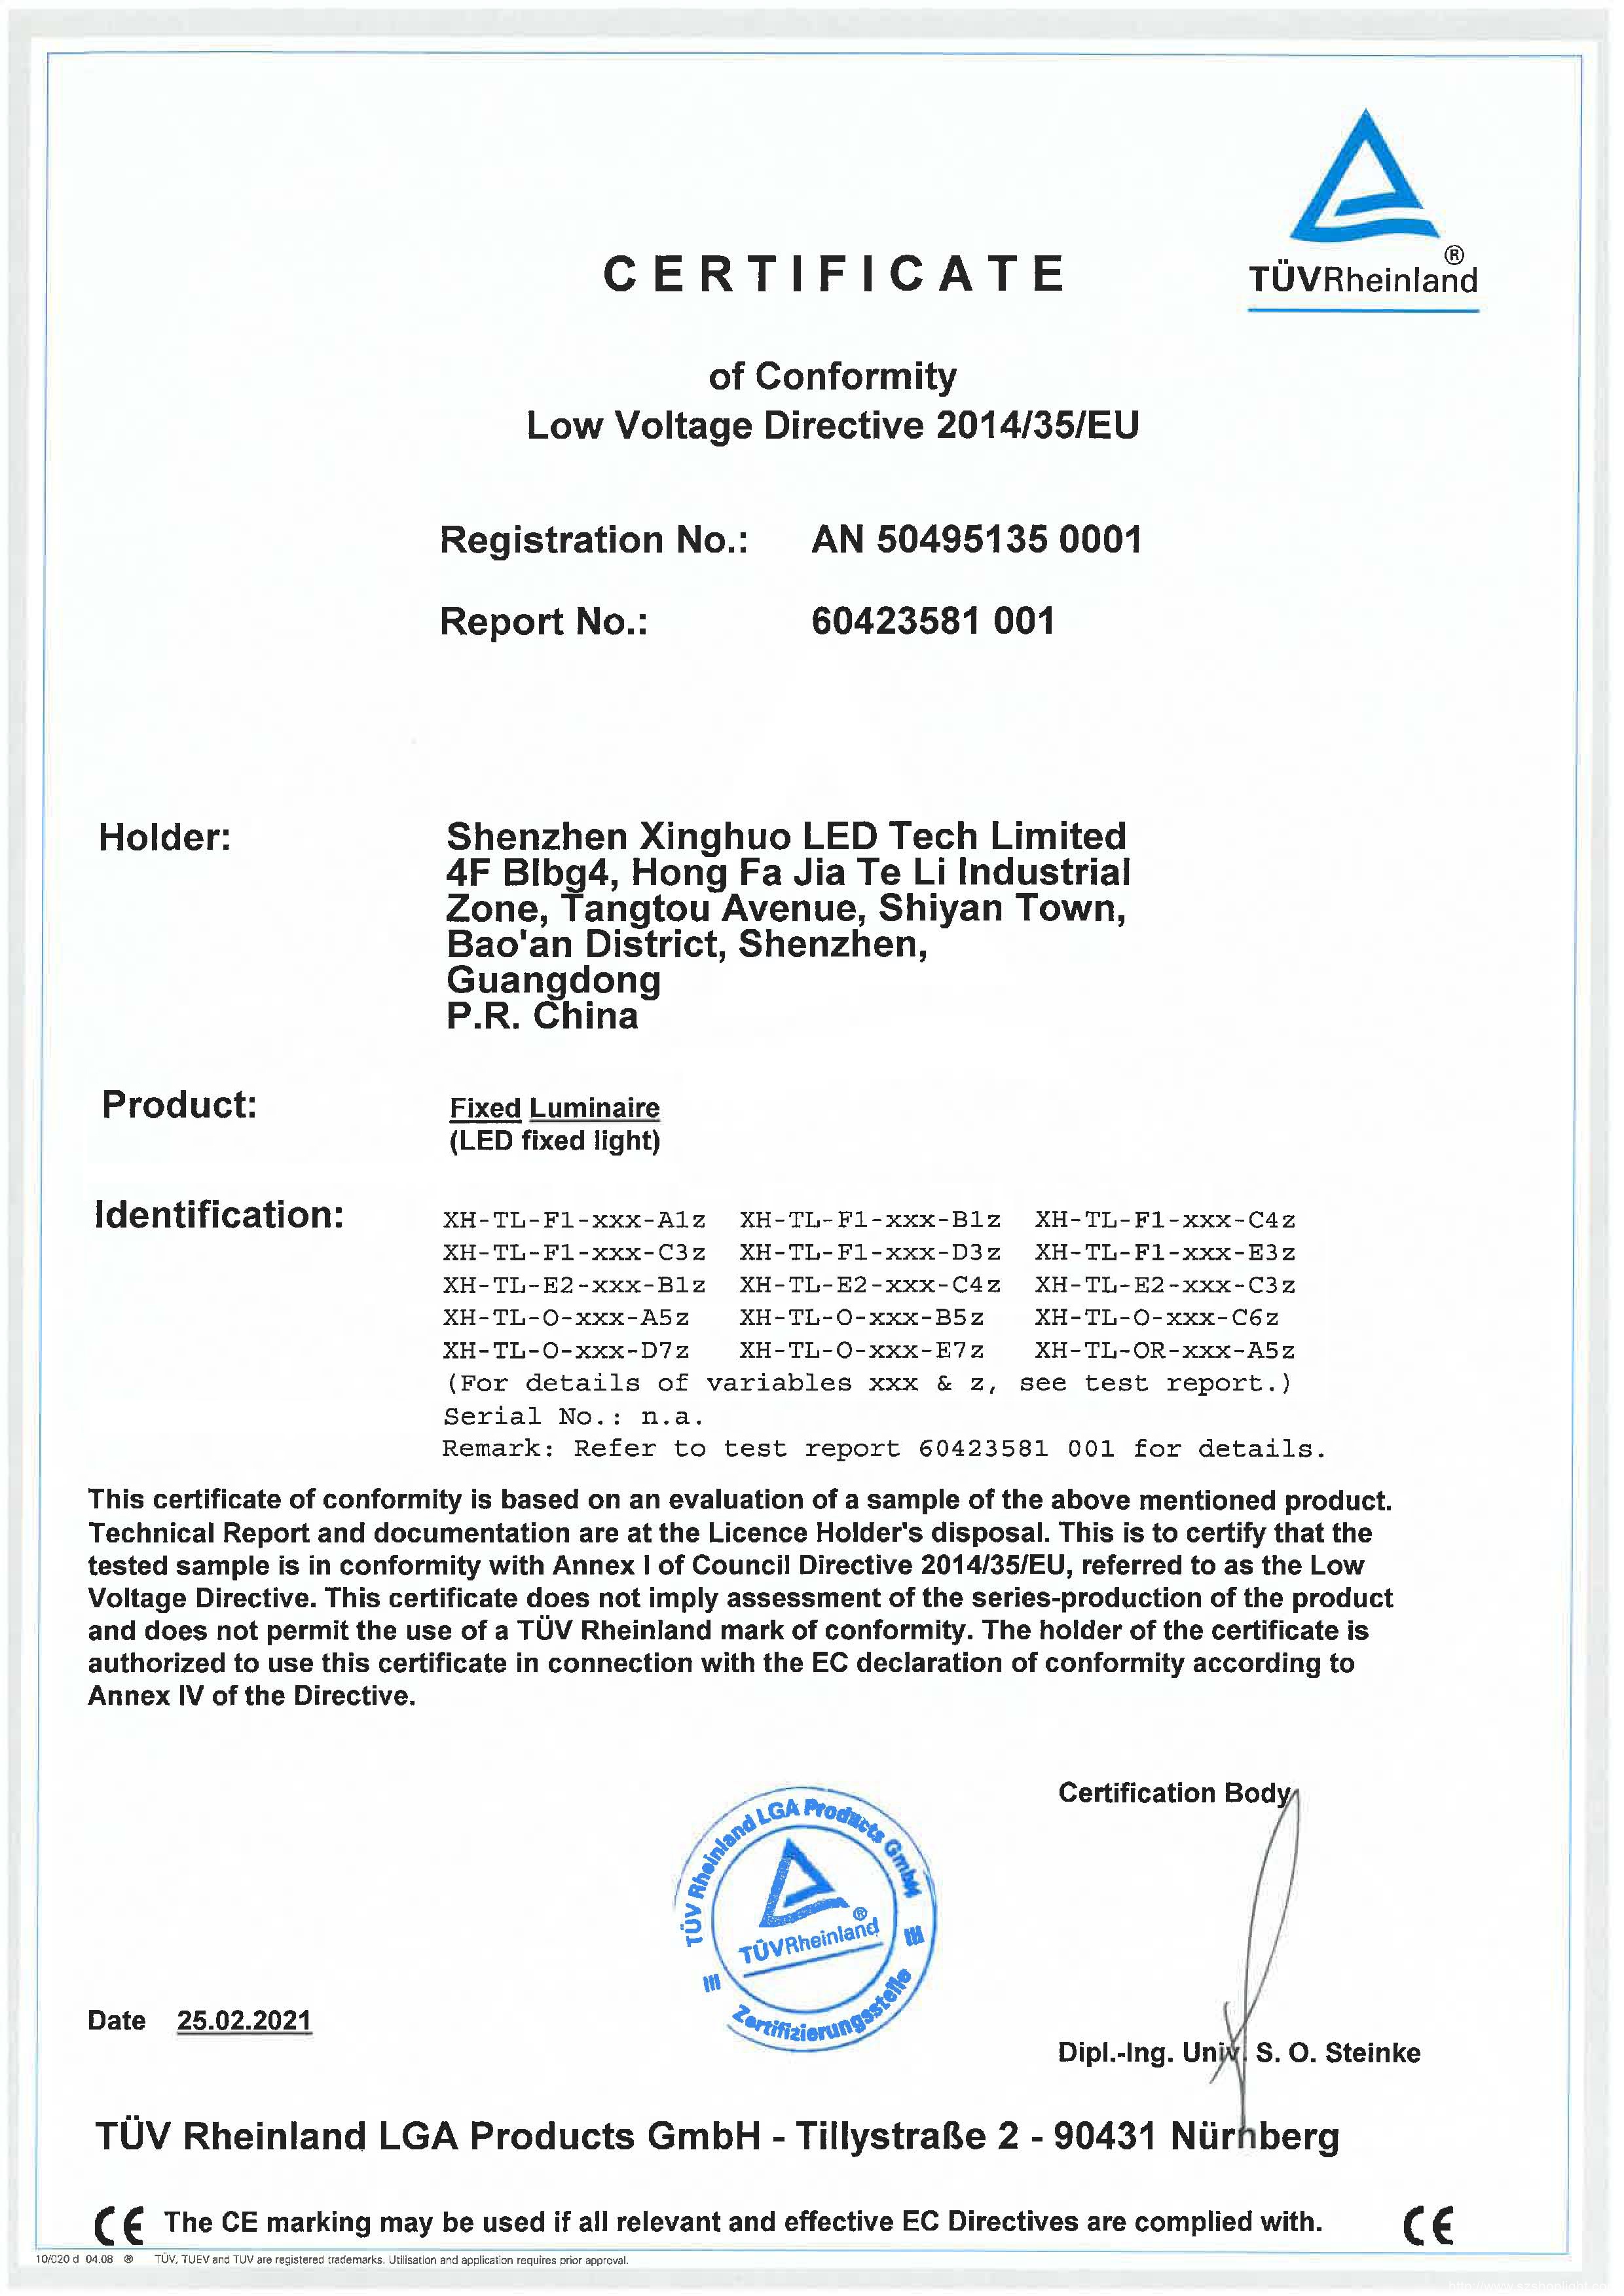 We have updated the certification to TUV